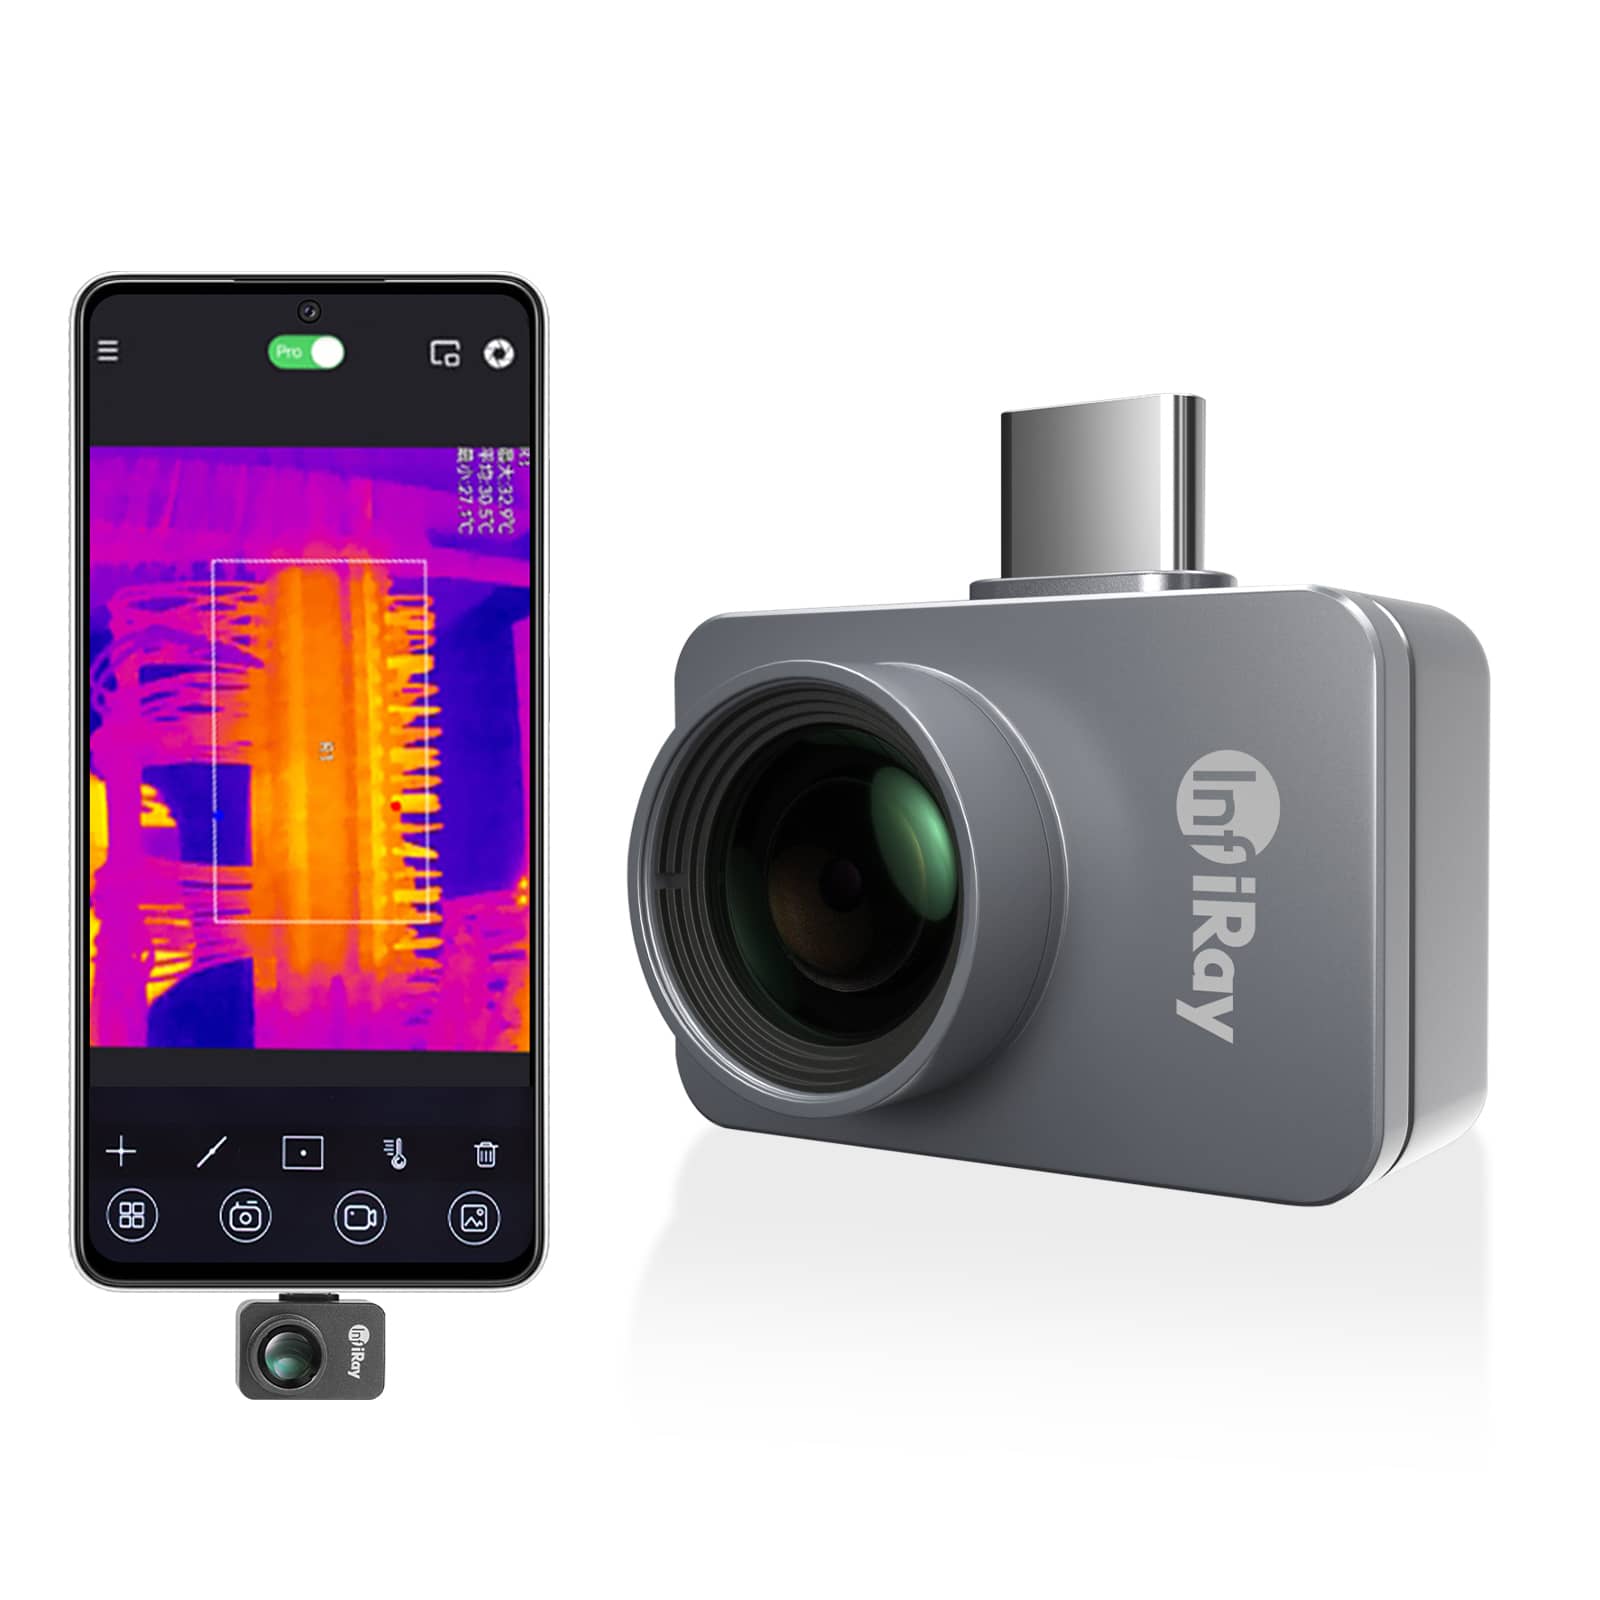 InfiRay P2 Pro Thermal Camera review: specs, performance, cost